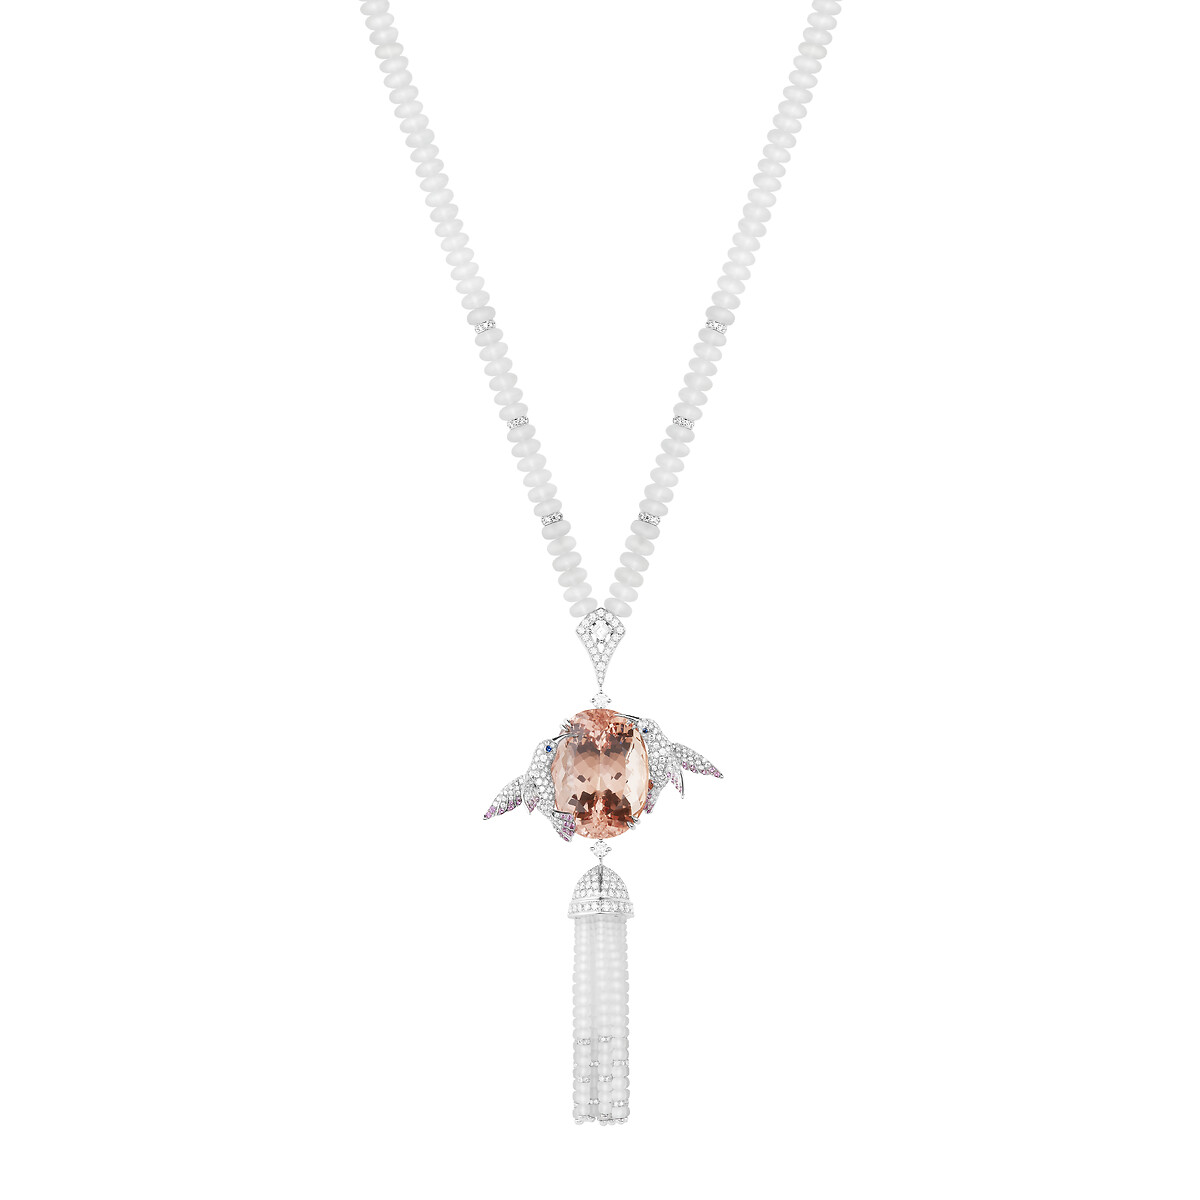 First product packshot Hopi, the Hummingbird Necklace